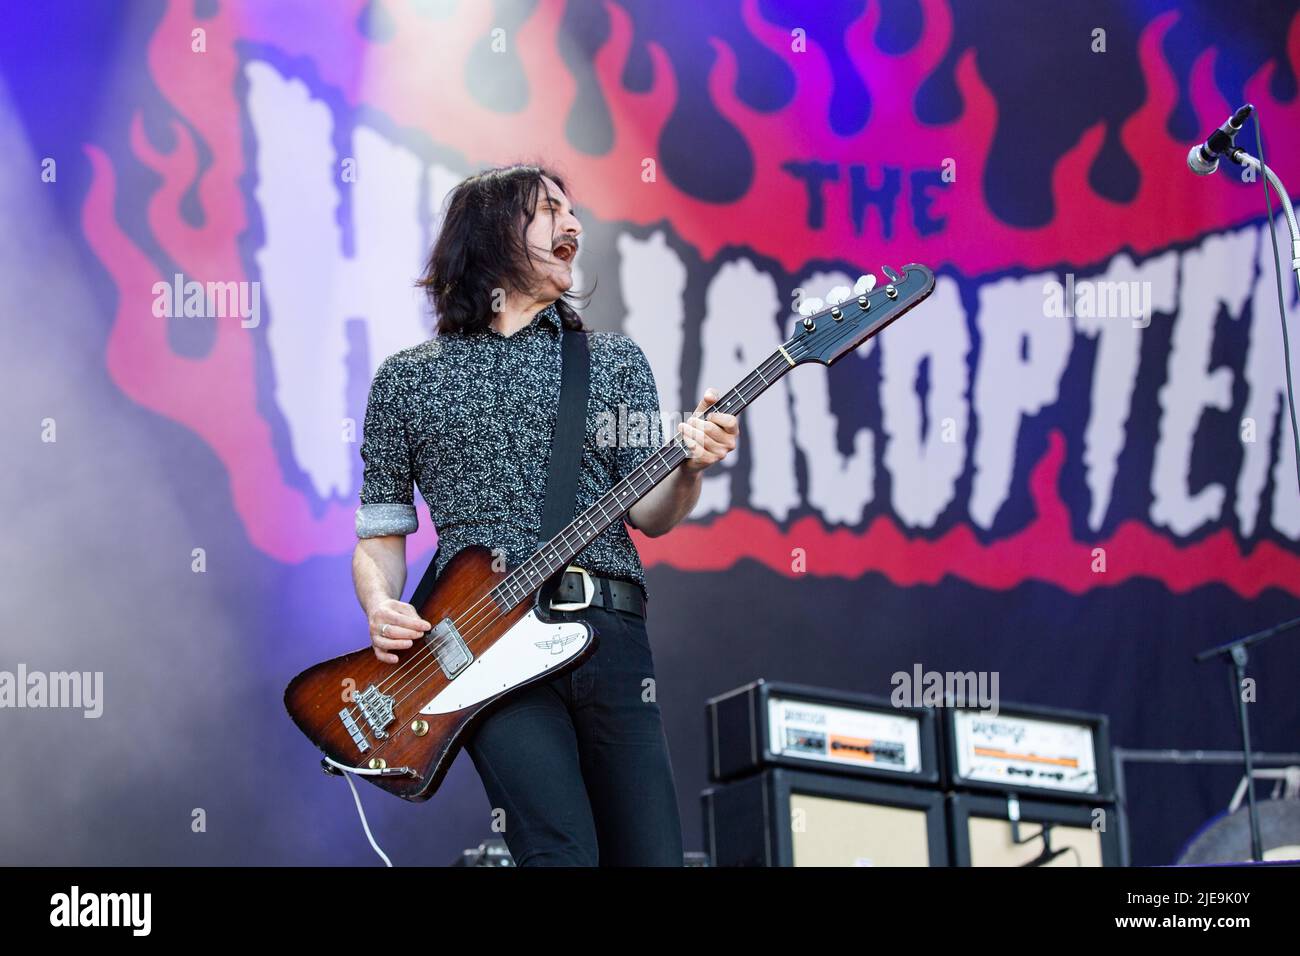 Oslo, Norway. 24th, June 2022. The Swedish hard rock band The Hellacopters performs a live concert during the Norwegian music festival Tons of Rock 2022 in Oslo. Here bass player Dolf DeBorst is seen live on stage. (Photo credit: Gonzales Photo - Per-Otto). Stock Photo